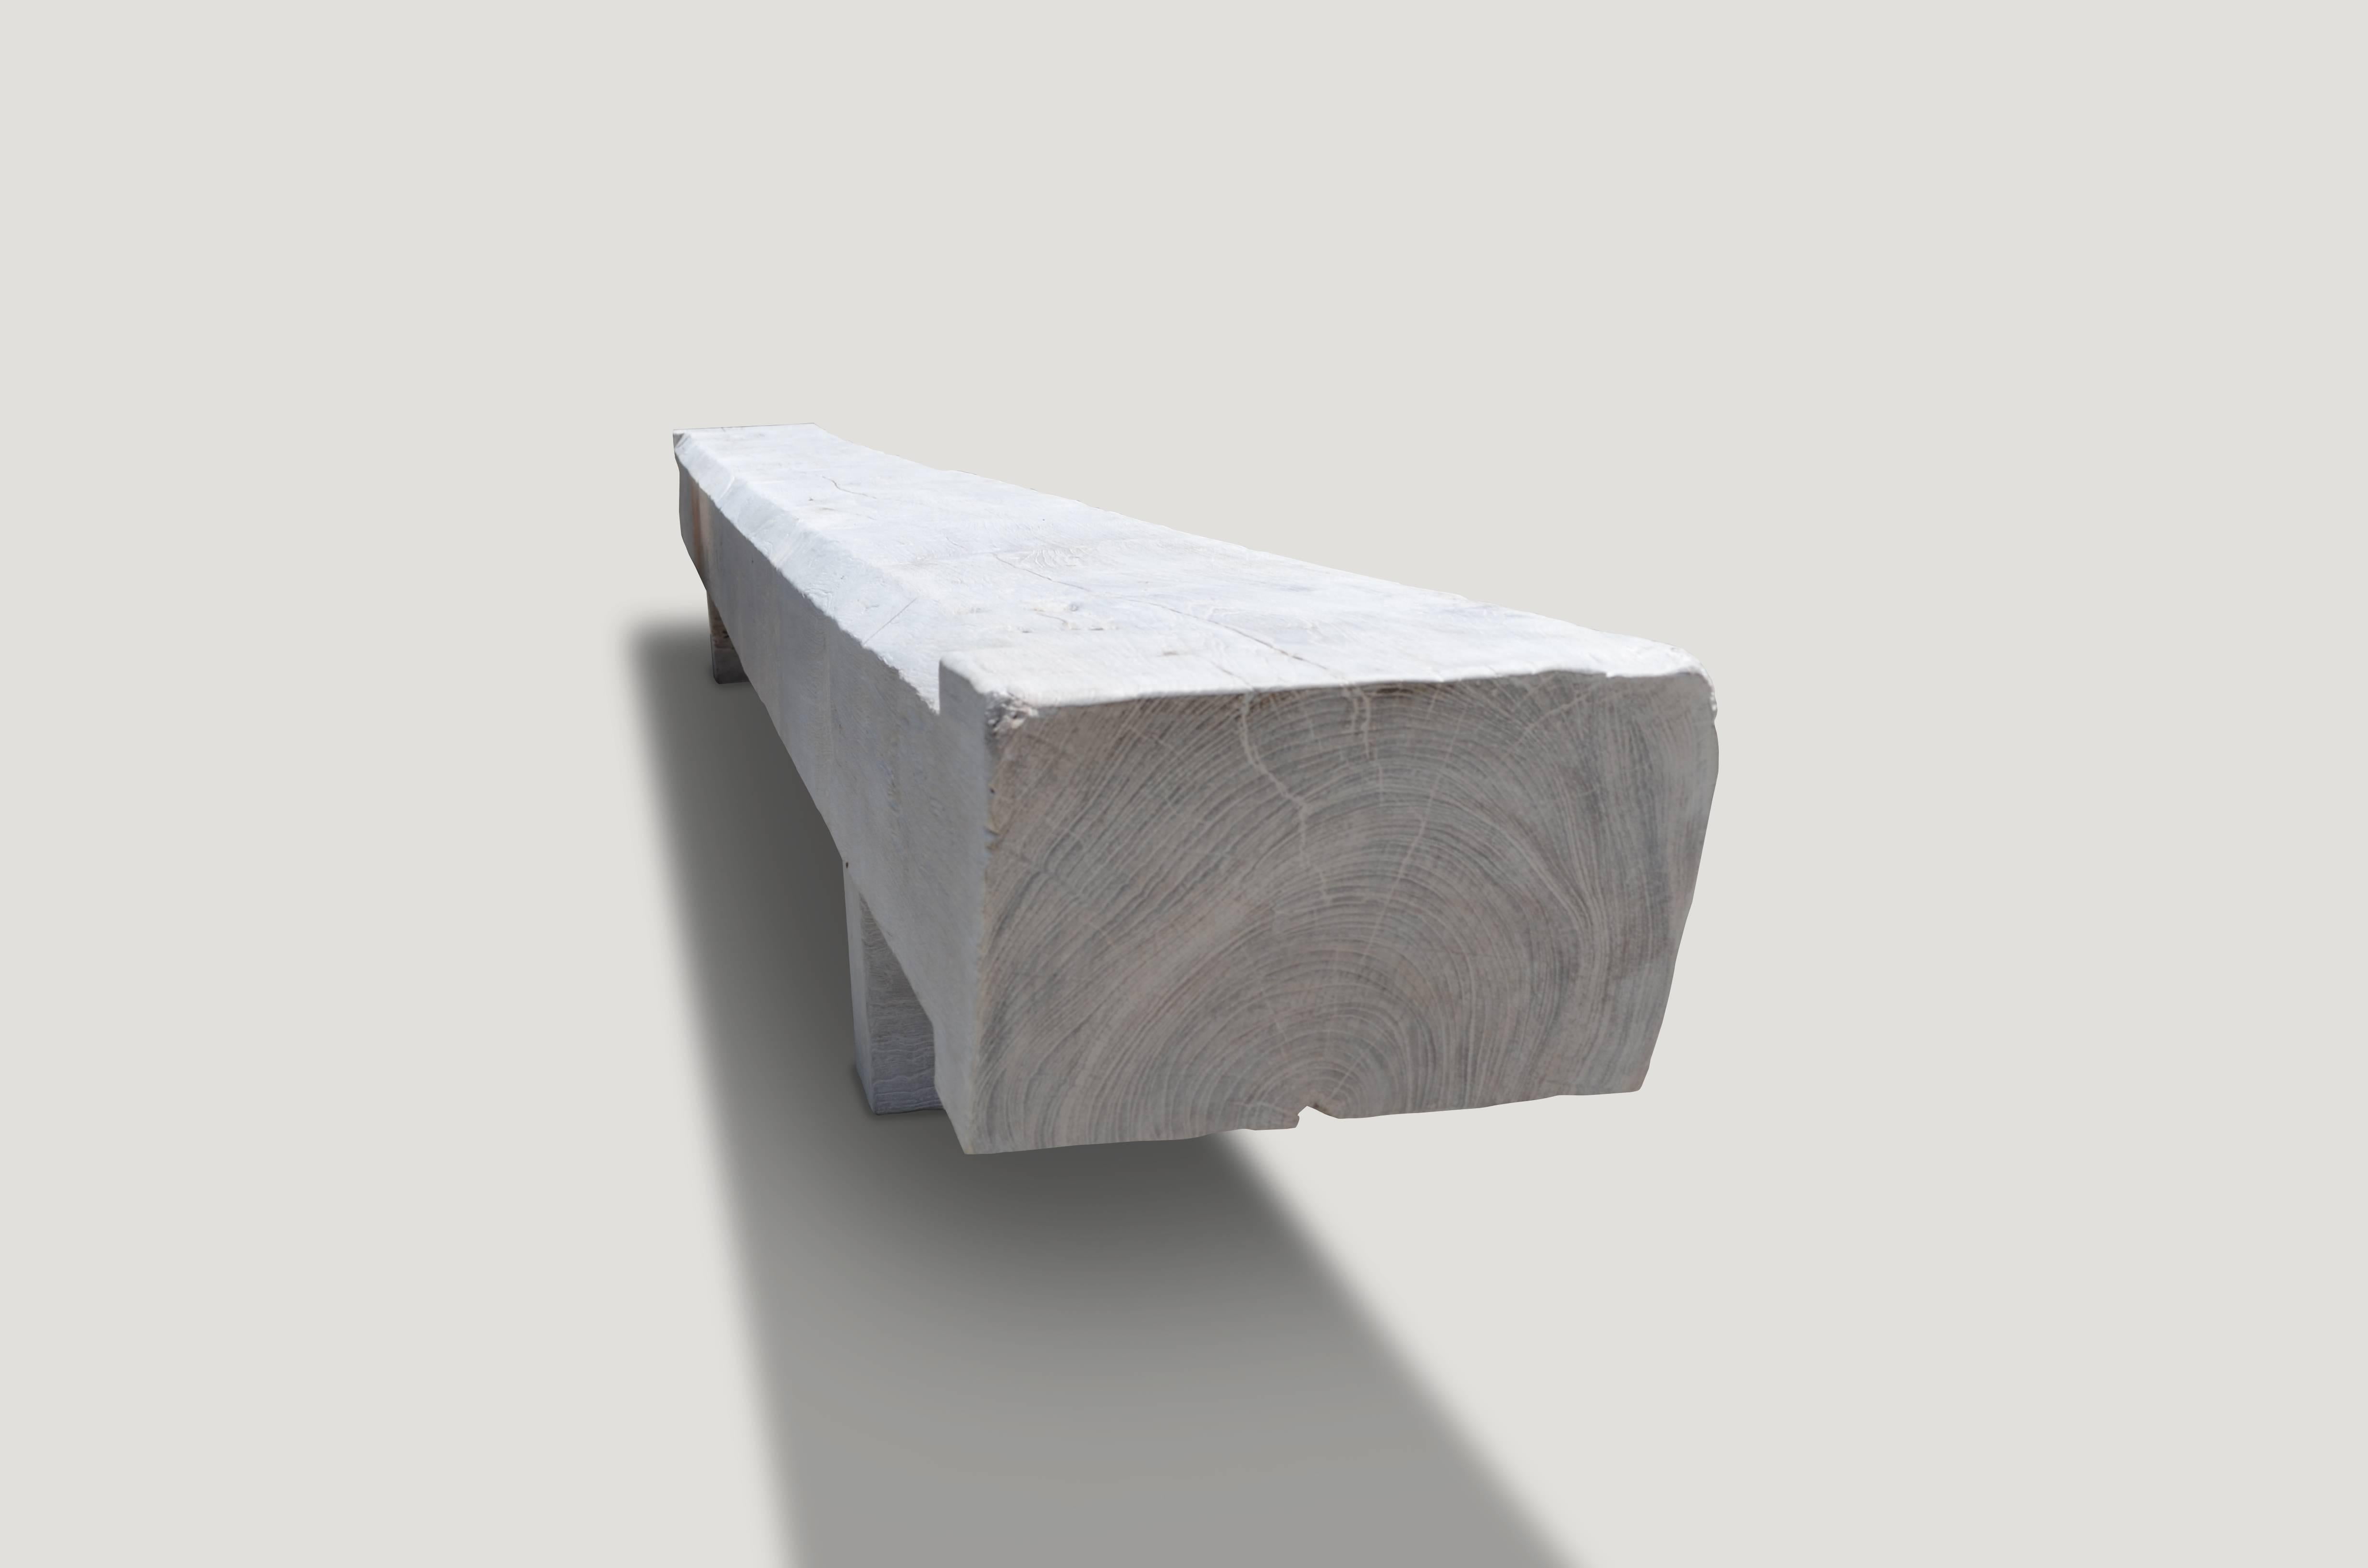 Impressive reclaimed bleached teak wood log bench with a light white washed finish. The hand carved top rests on a modern teak base. Perfect for inside or outside living.

The St. Barts collection features an exciting new line of organic white wash